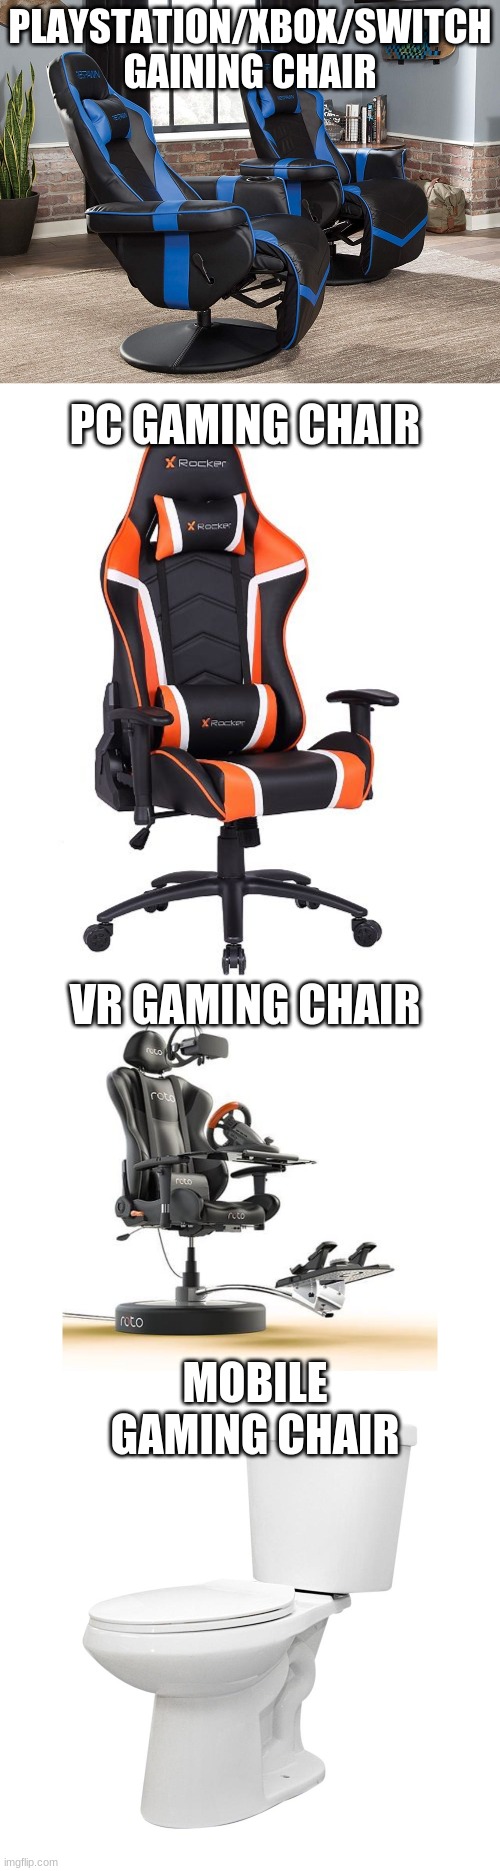 It do be hitting different doe | PLAYSTATION/XBOX/SWITCH GAINING CHAIR; PC GAMING CHAIR; VR GAMING CHAIR; MOBILE GAMING CHAIR | image tagged in gaming,and now for something completely different | made w/ Imgflip meme maker